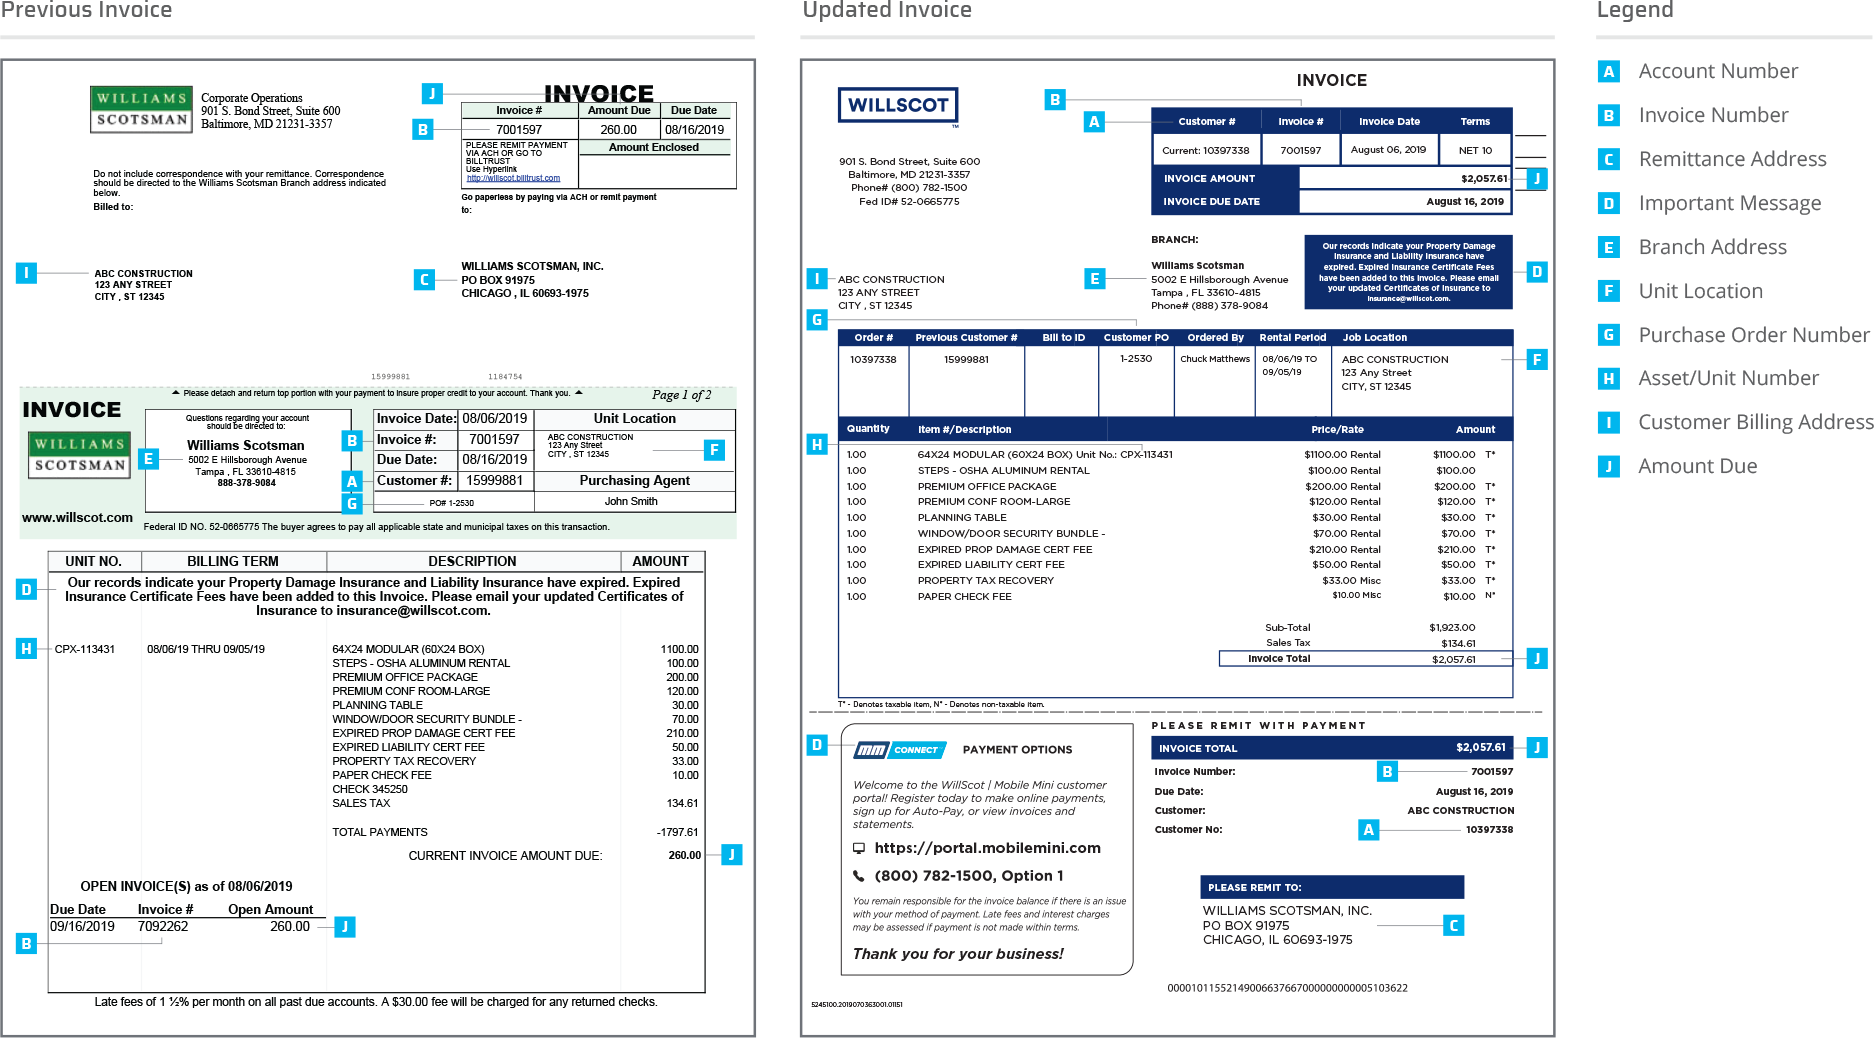 Image showing difference between Williams Scotsman and WillScot invoices